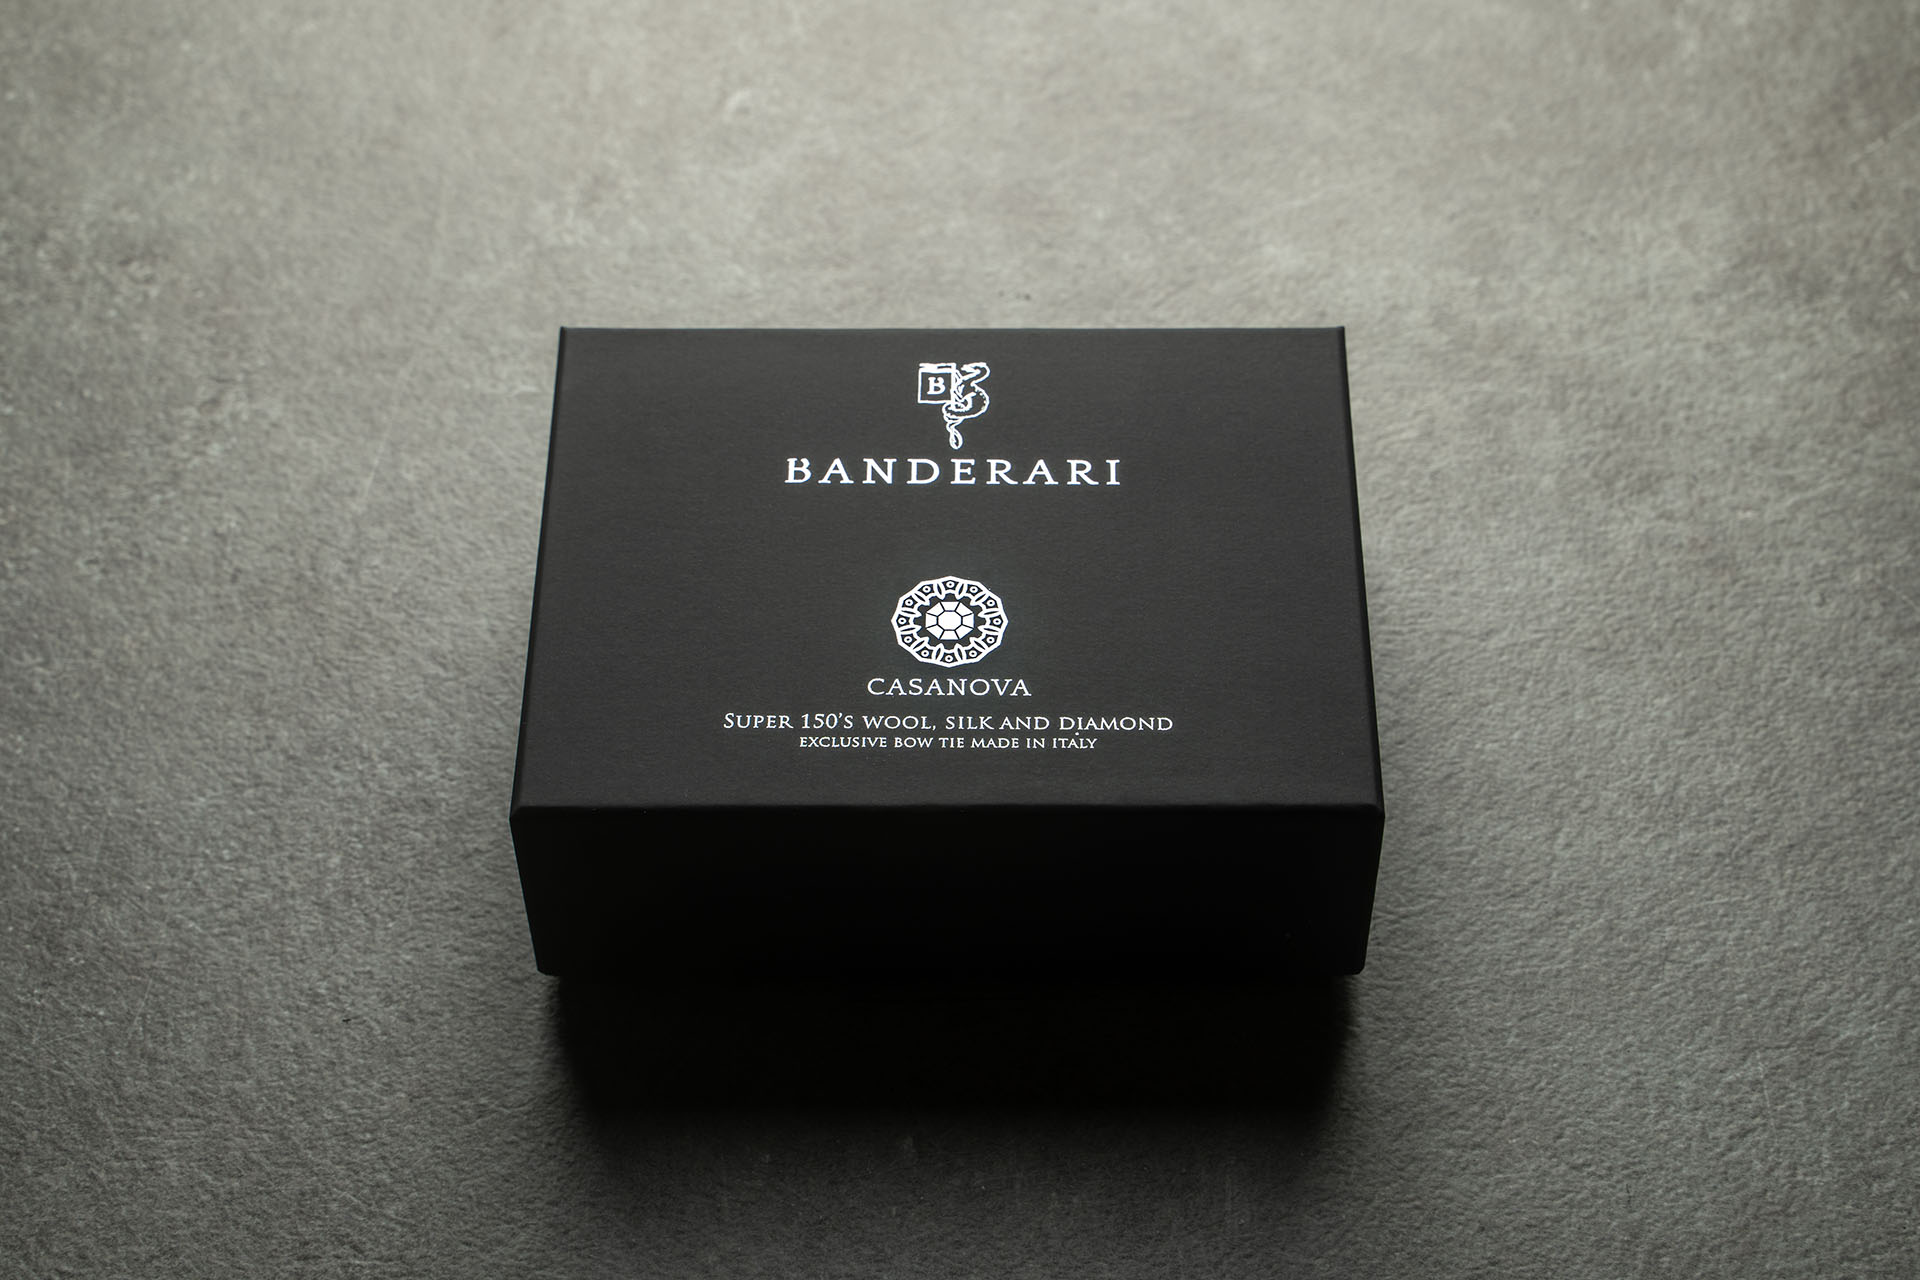 Packaging of the Banderari Casanova bow tie from the Luxus collection